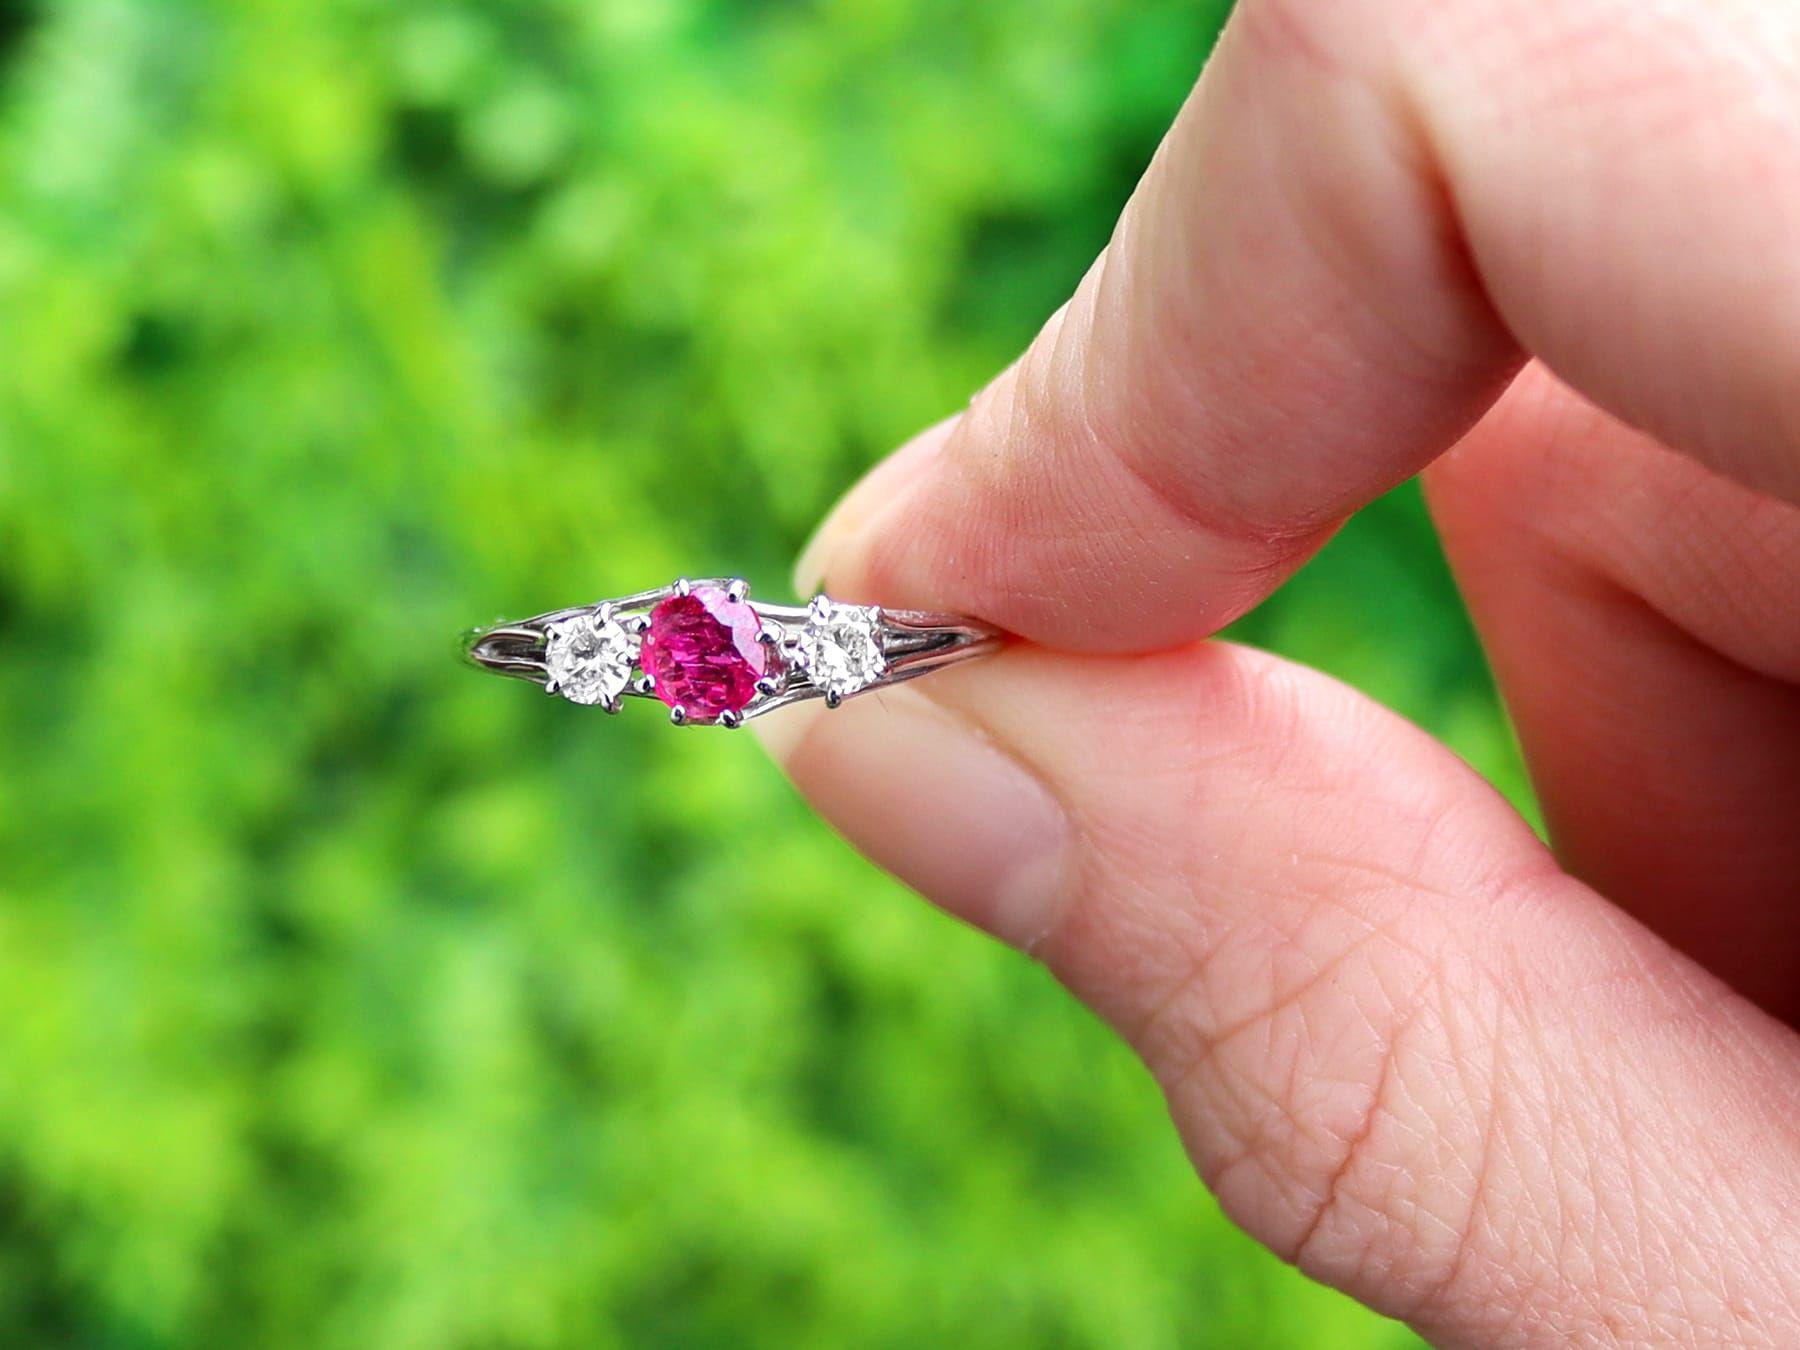 A fine and impressive vintage 0.56 carat ruby and 0.25 carat diamond, 18 karat white gold multi strand trilogy/three stone ring; part of our vintage jewellery and estate jewelry collections.

This fine and impressive vintage trilogy ring has been